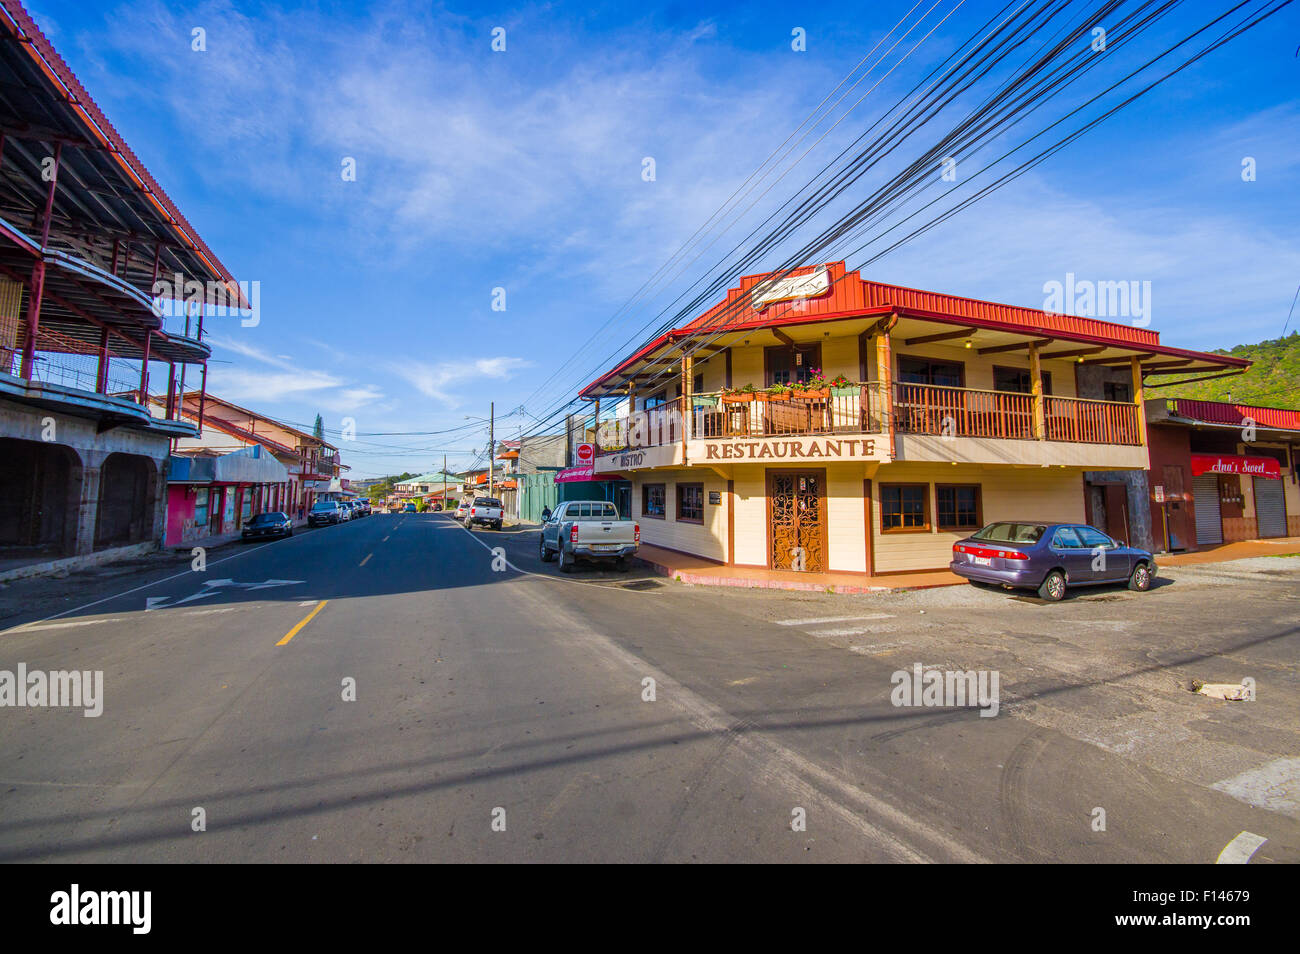 Boquete is a small town on the Caldera River, in the green mountain highlands of Panama. Stock Photo